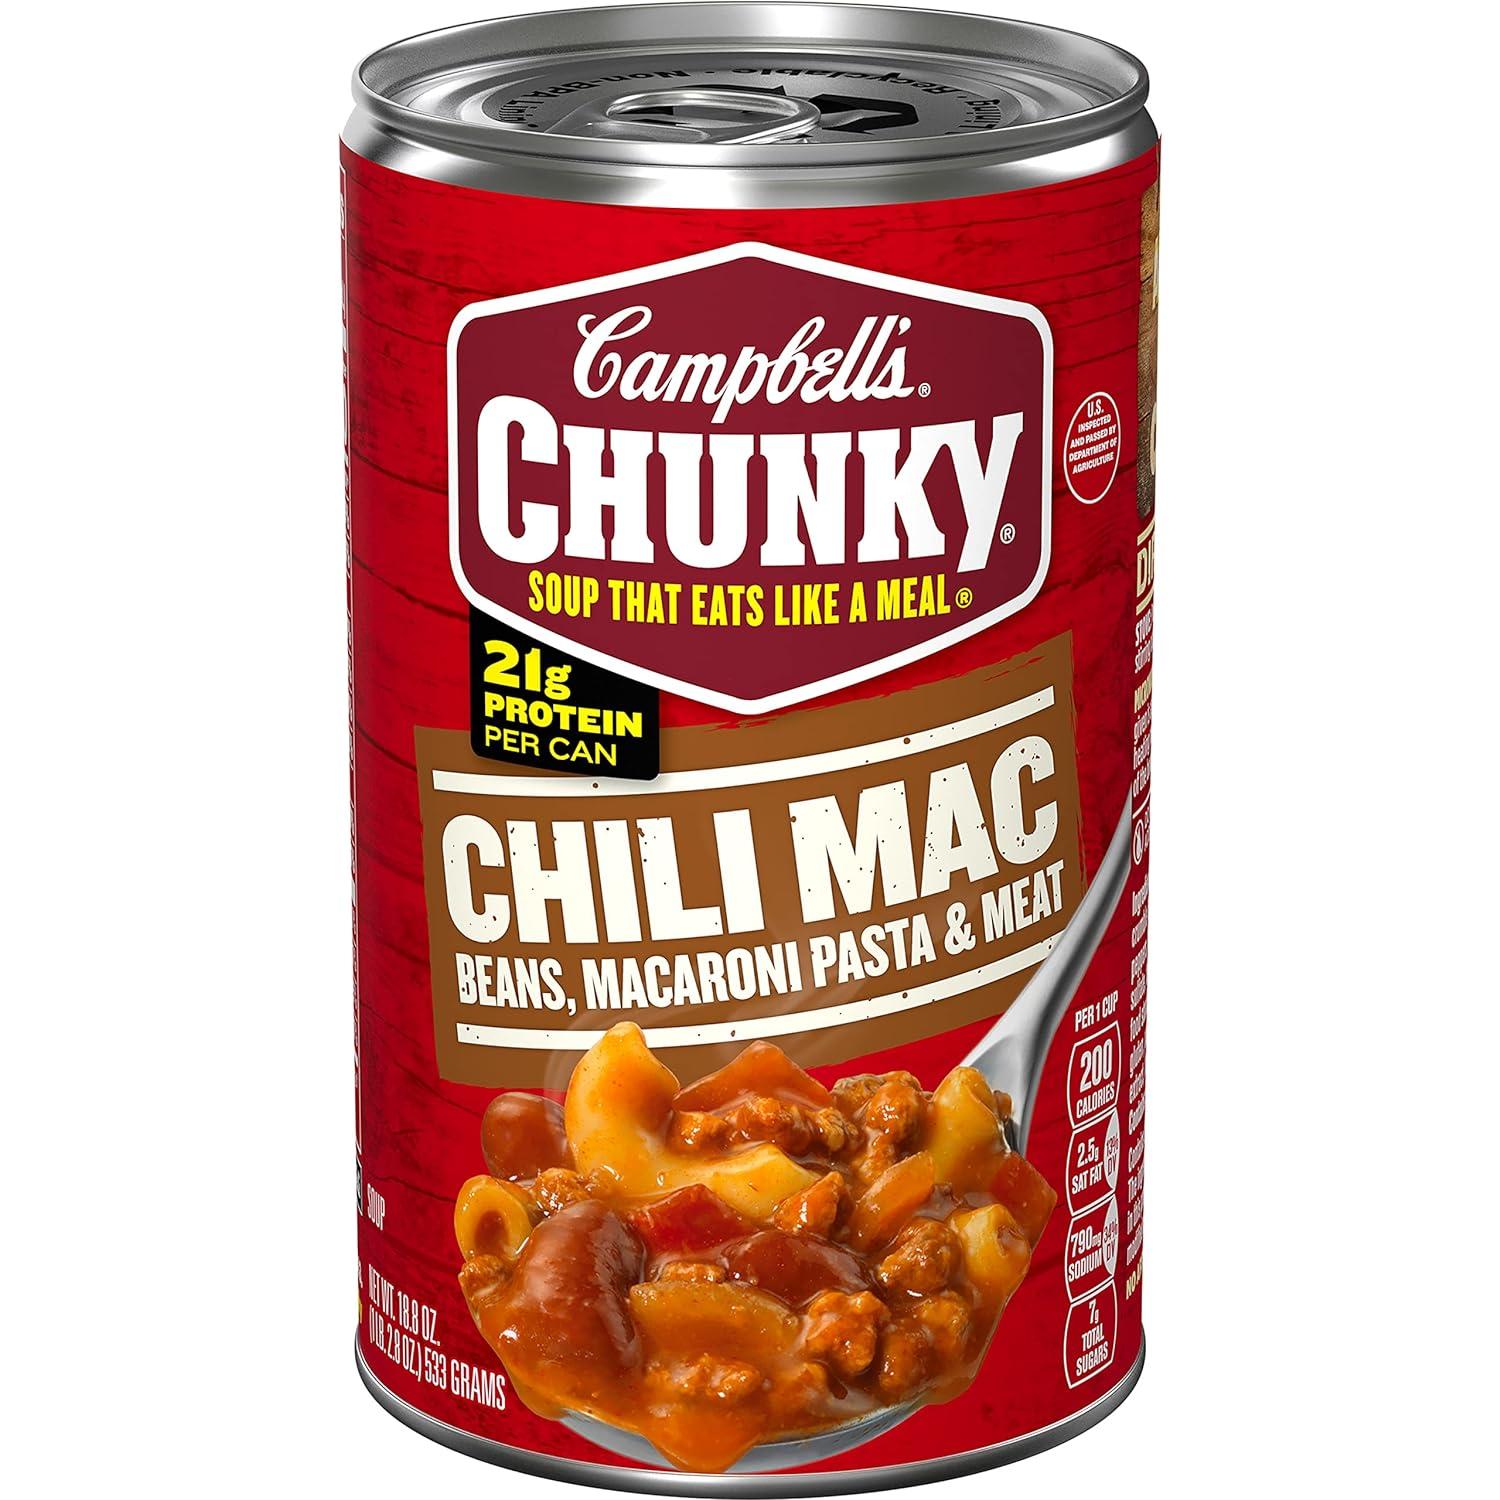 Campbells Chunky Soup Chili Mac Can for $1.19